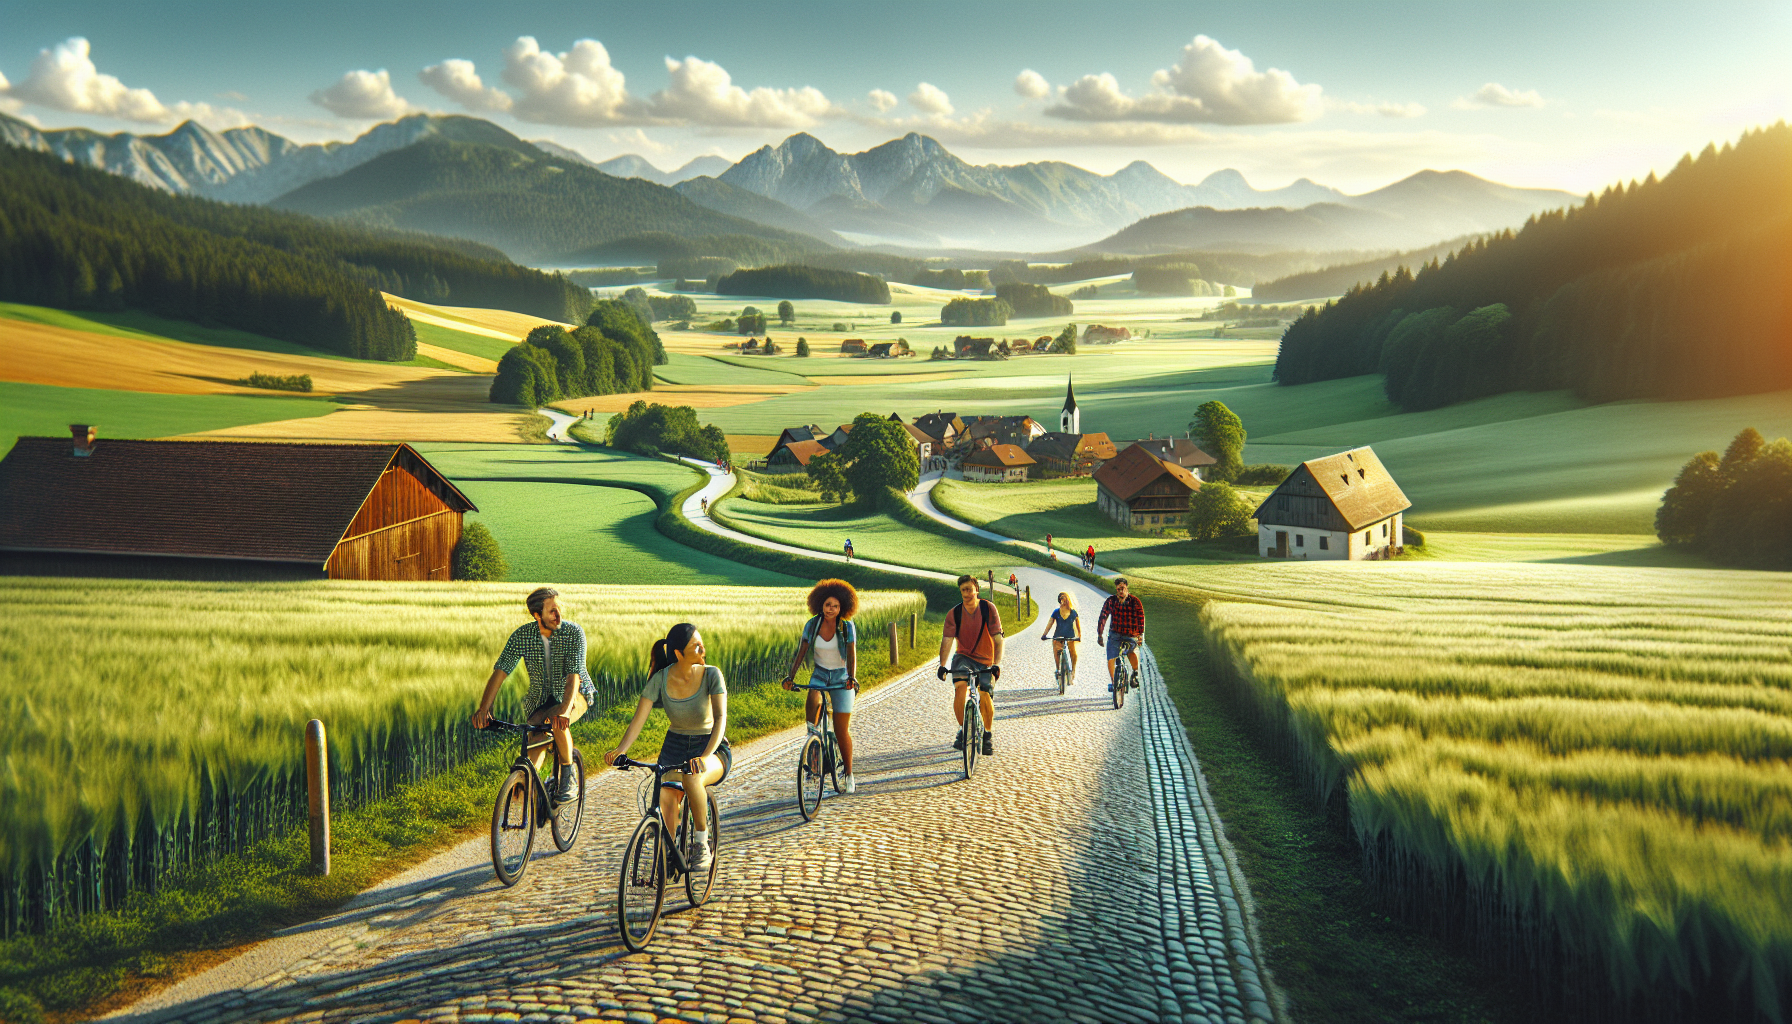 discover thrilling bike tours and trails in europe and get ready to pedal your way to adventure! explore the stunning landscapes and cultural gems on these exciting cycling routes.